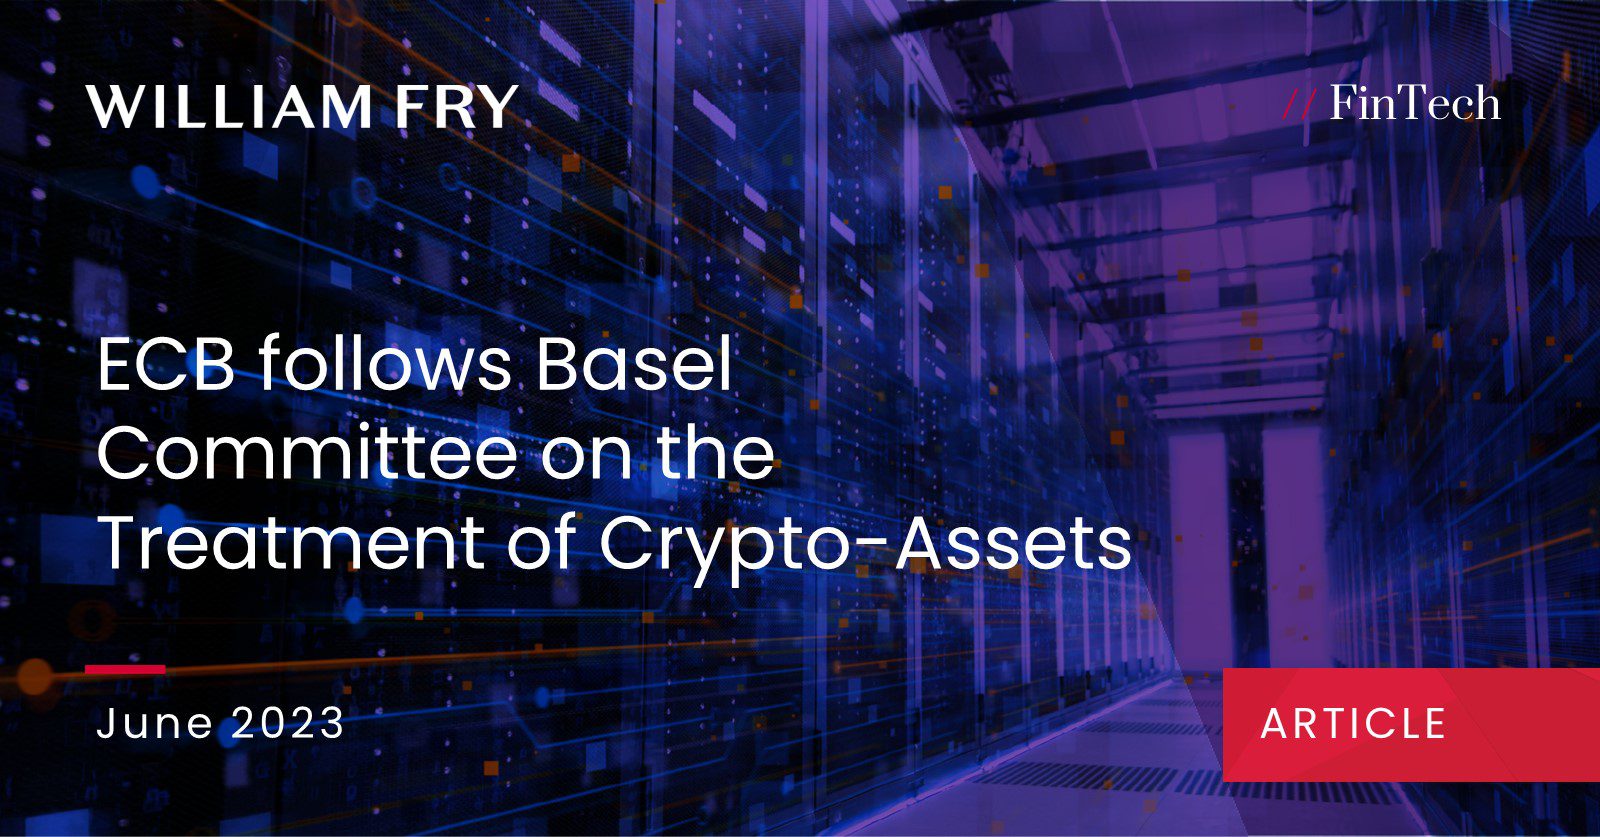 ECB follows Basel Committee on the Treatment of Crypto-Assets